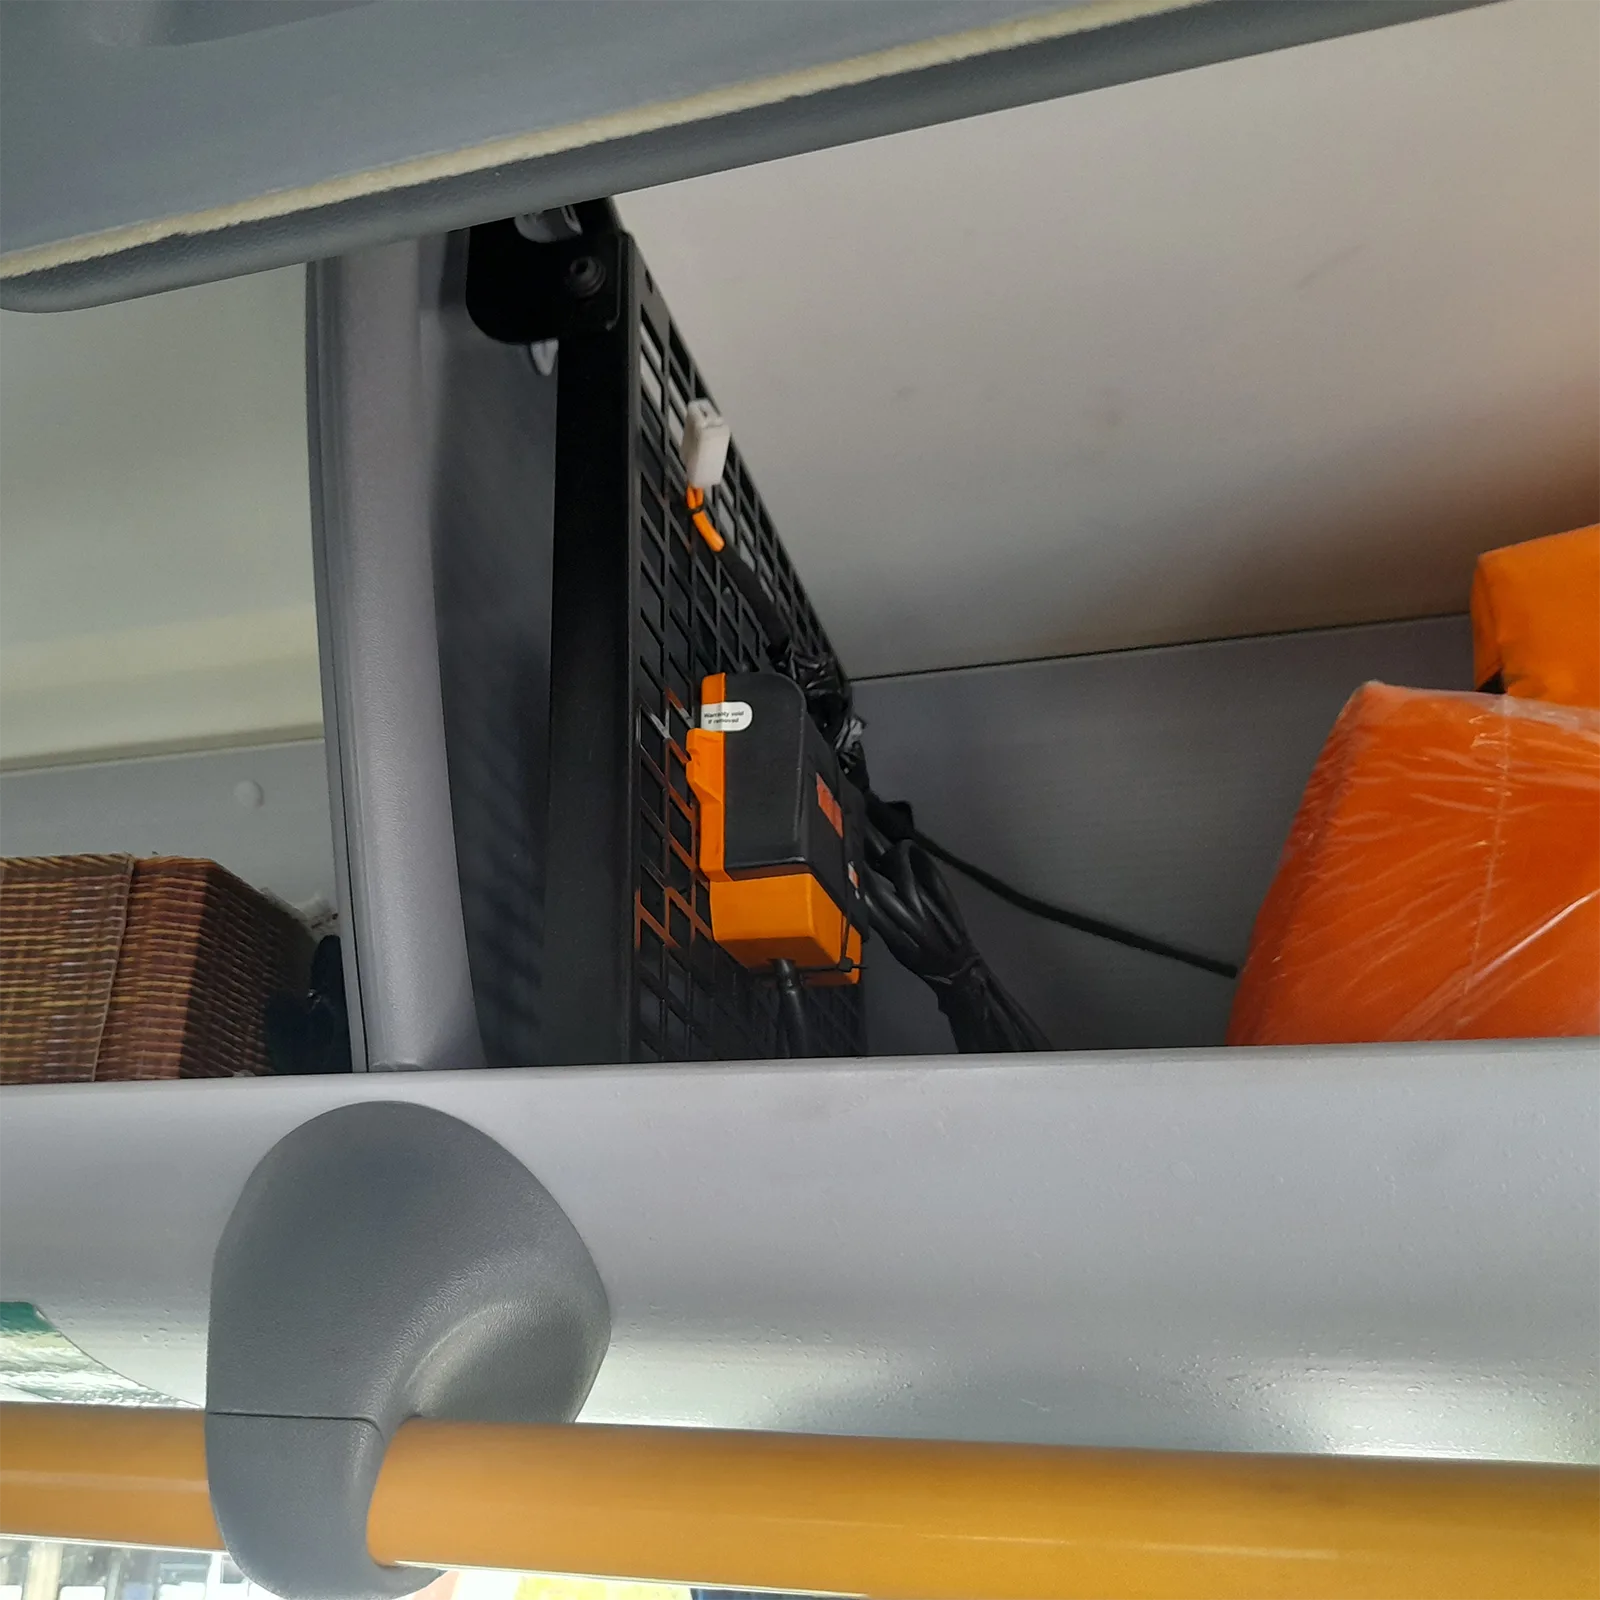 CANUp Pro Wi-Fi telematics gateway is located in the passenger compartment of the bus